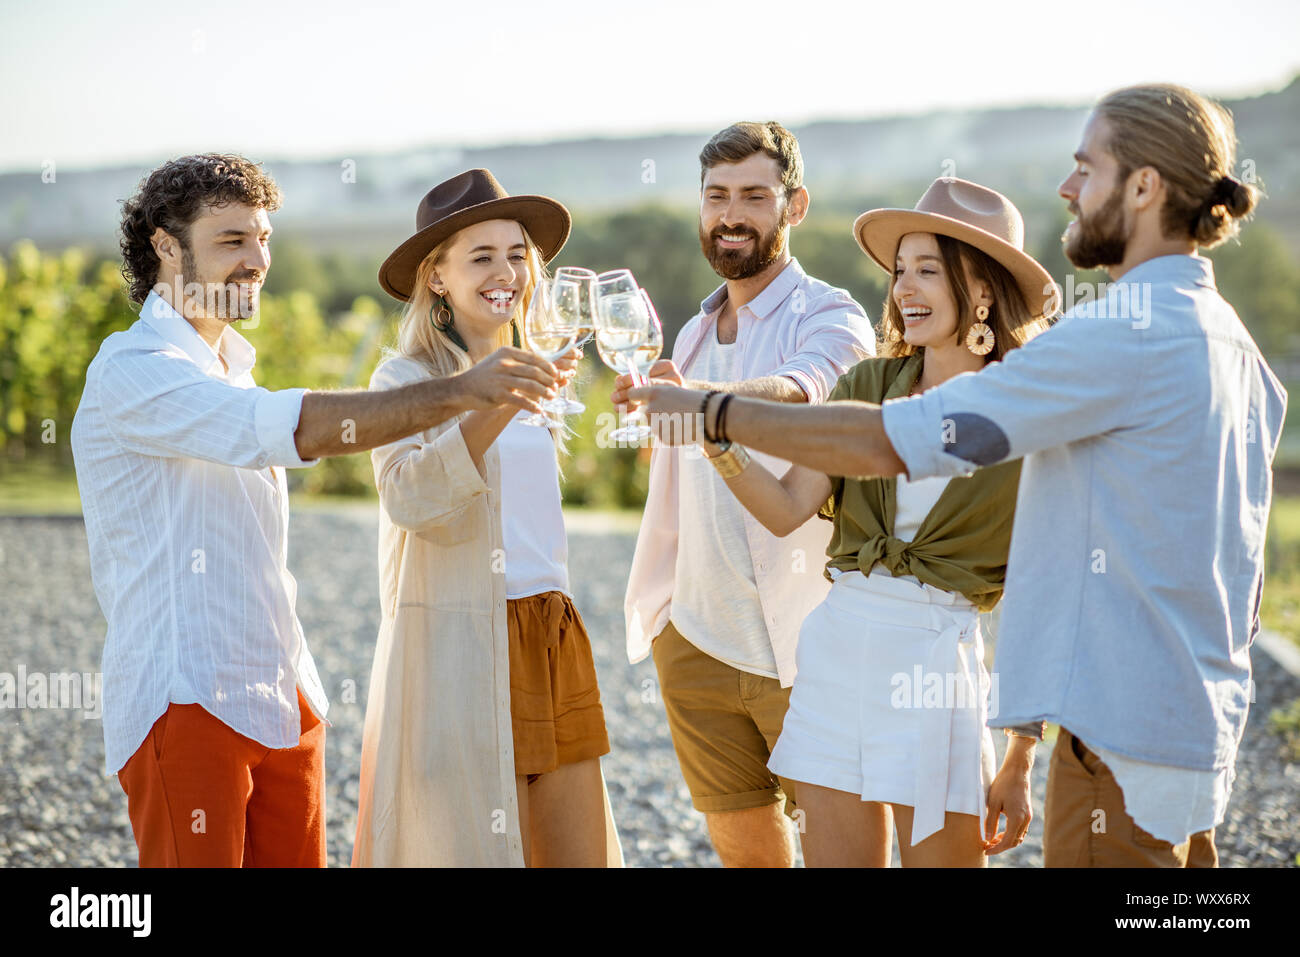 Group of young friends dressed casually hanging out together, tasting wine and clinking glasses on the vineyard on a sunny day Stock Photo